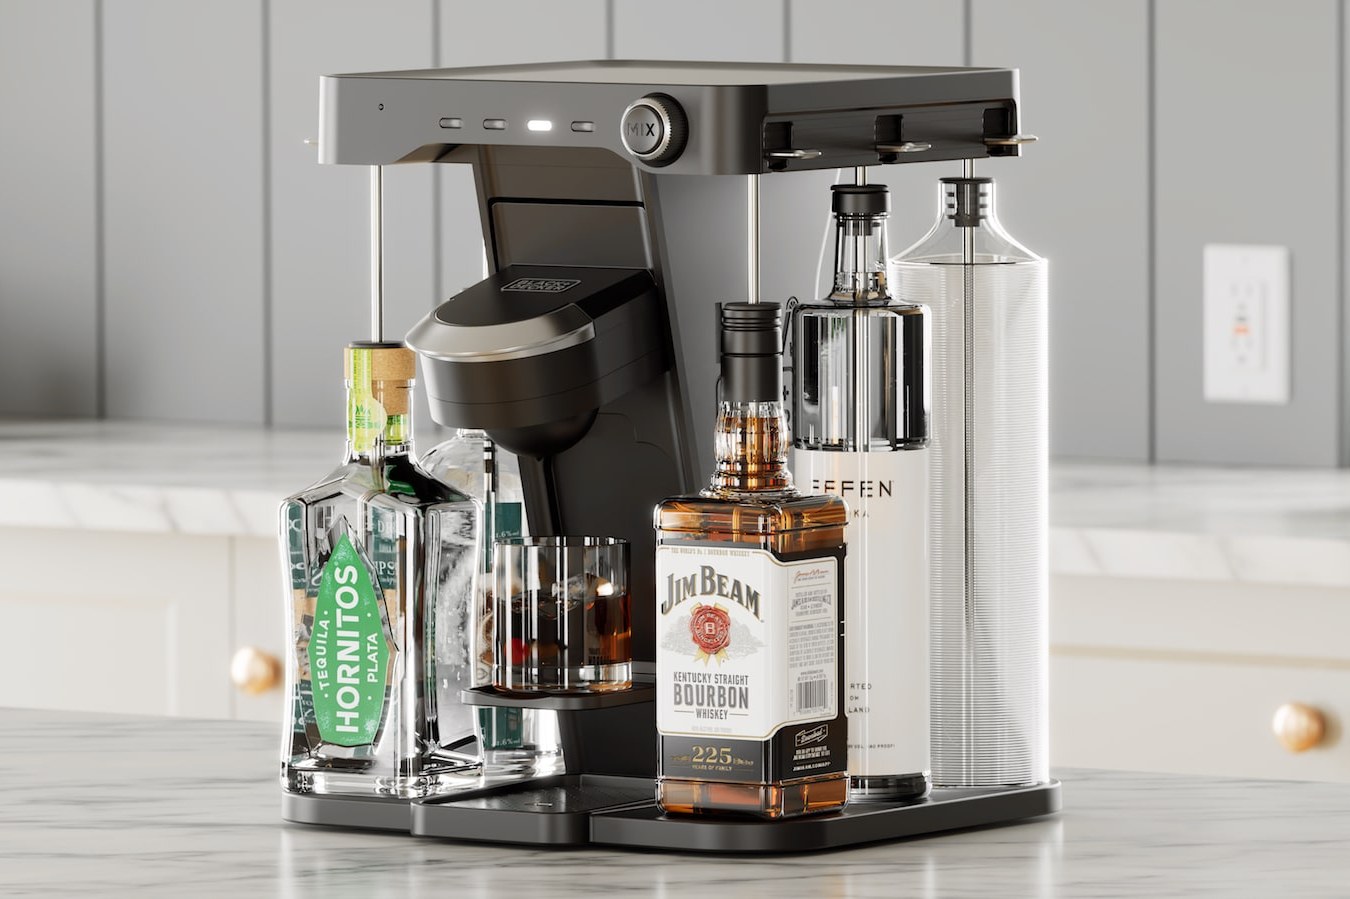 Black + Decker's latest Kitchen Appliance is like a Keurig for